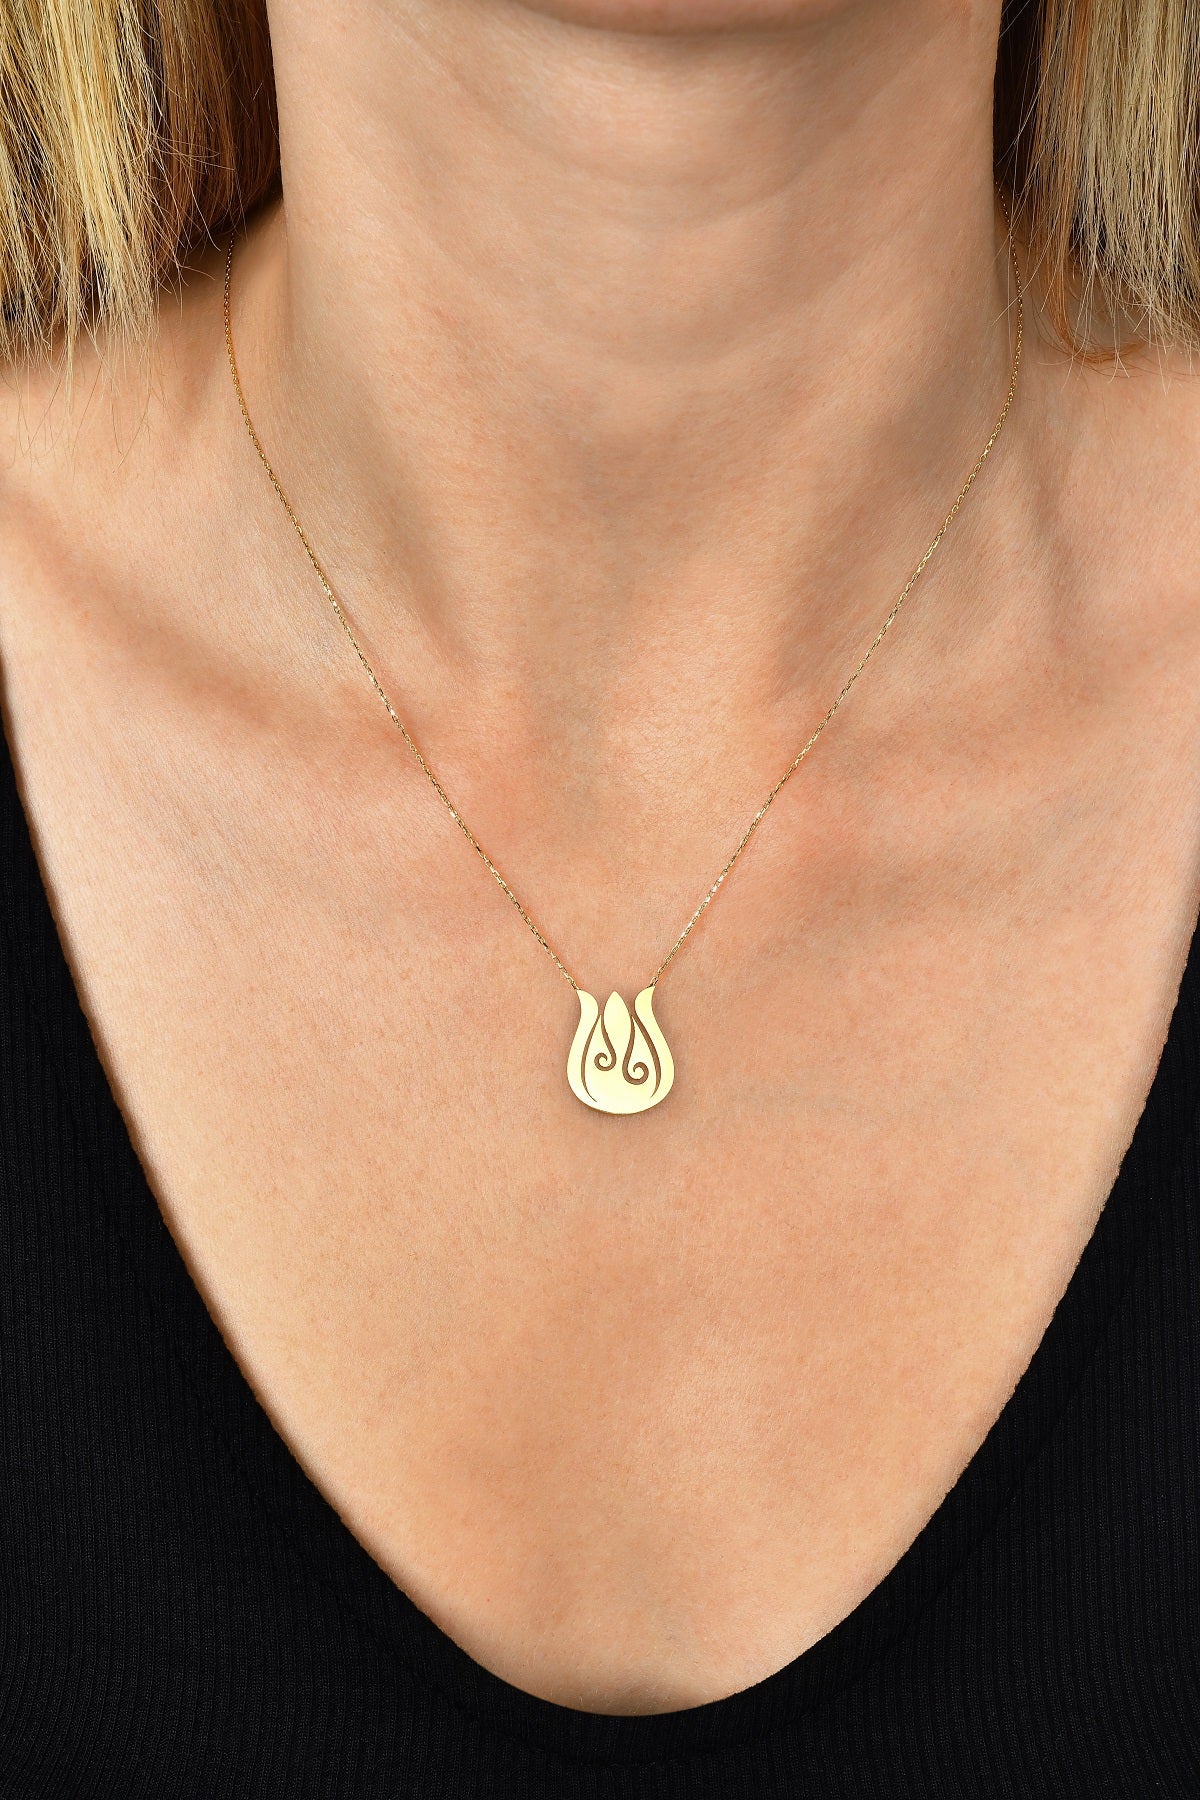 Special Design Gift 14k Gold Tulip Necklace